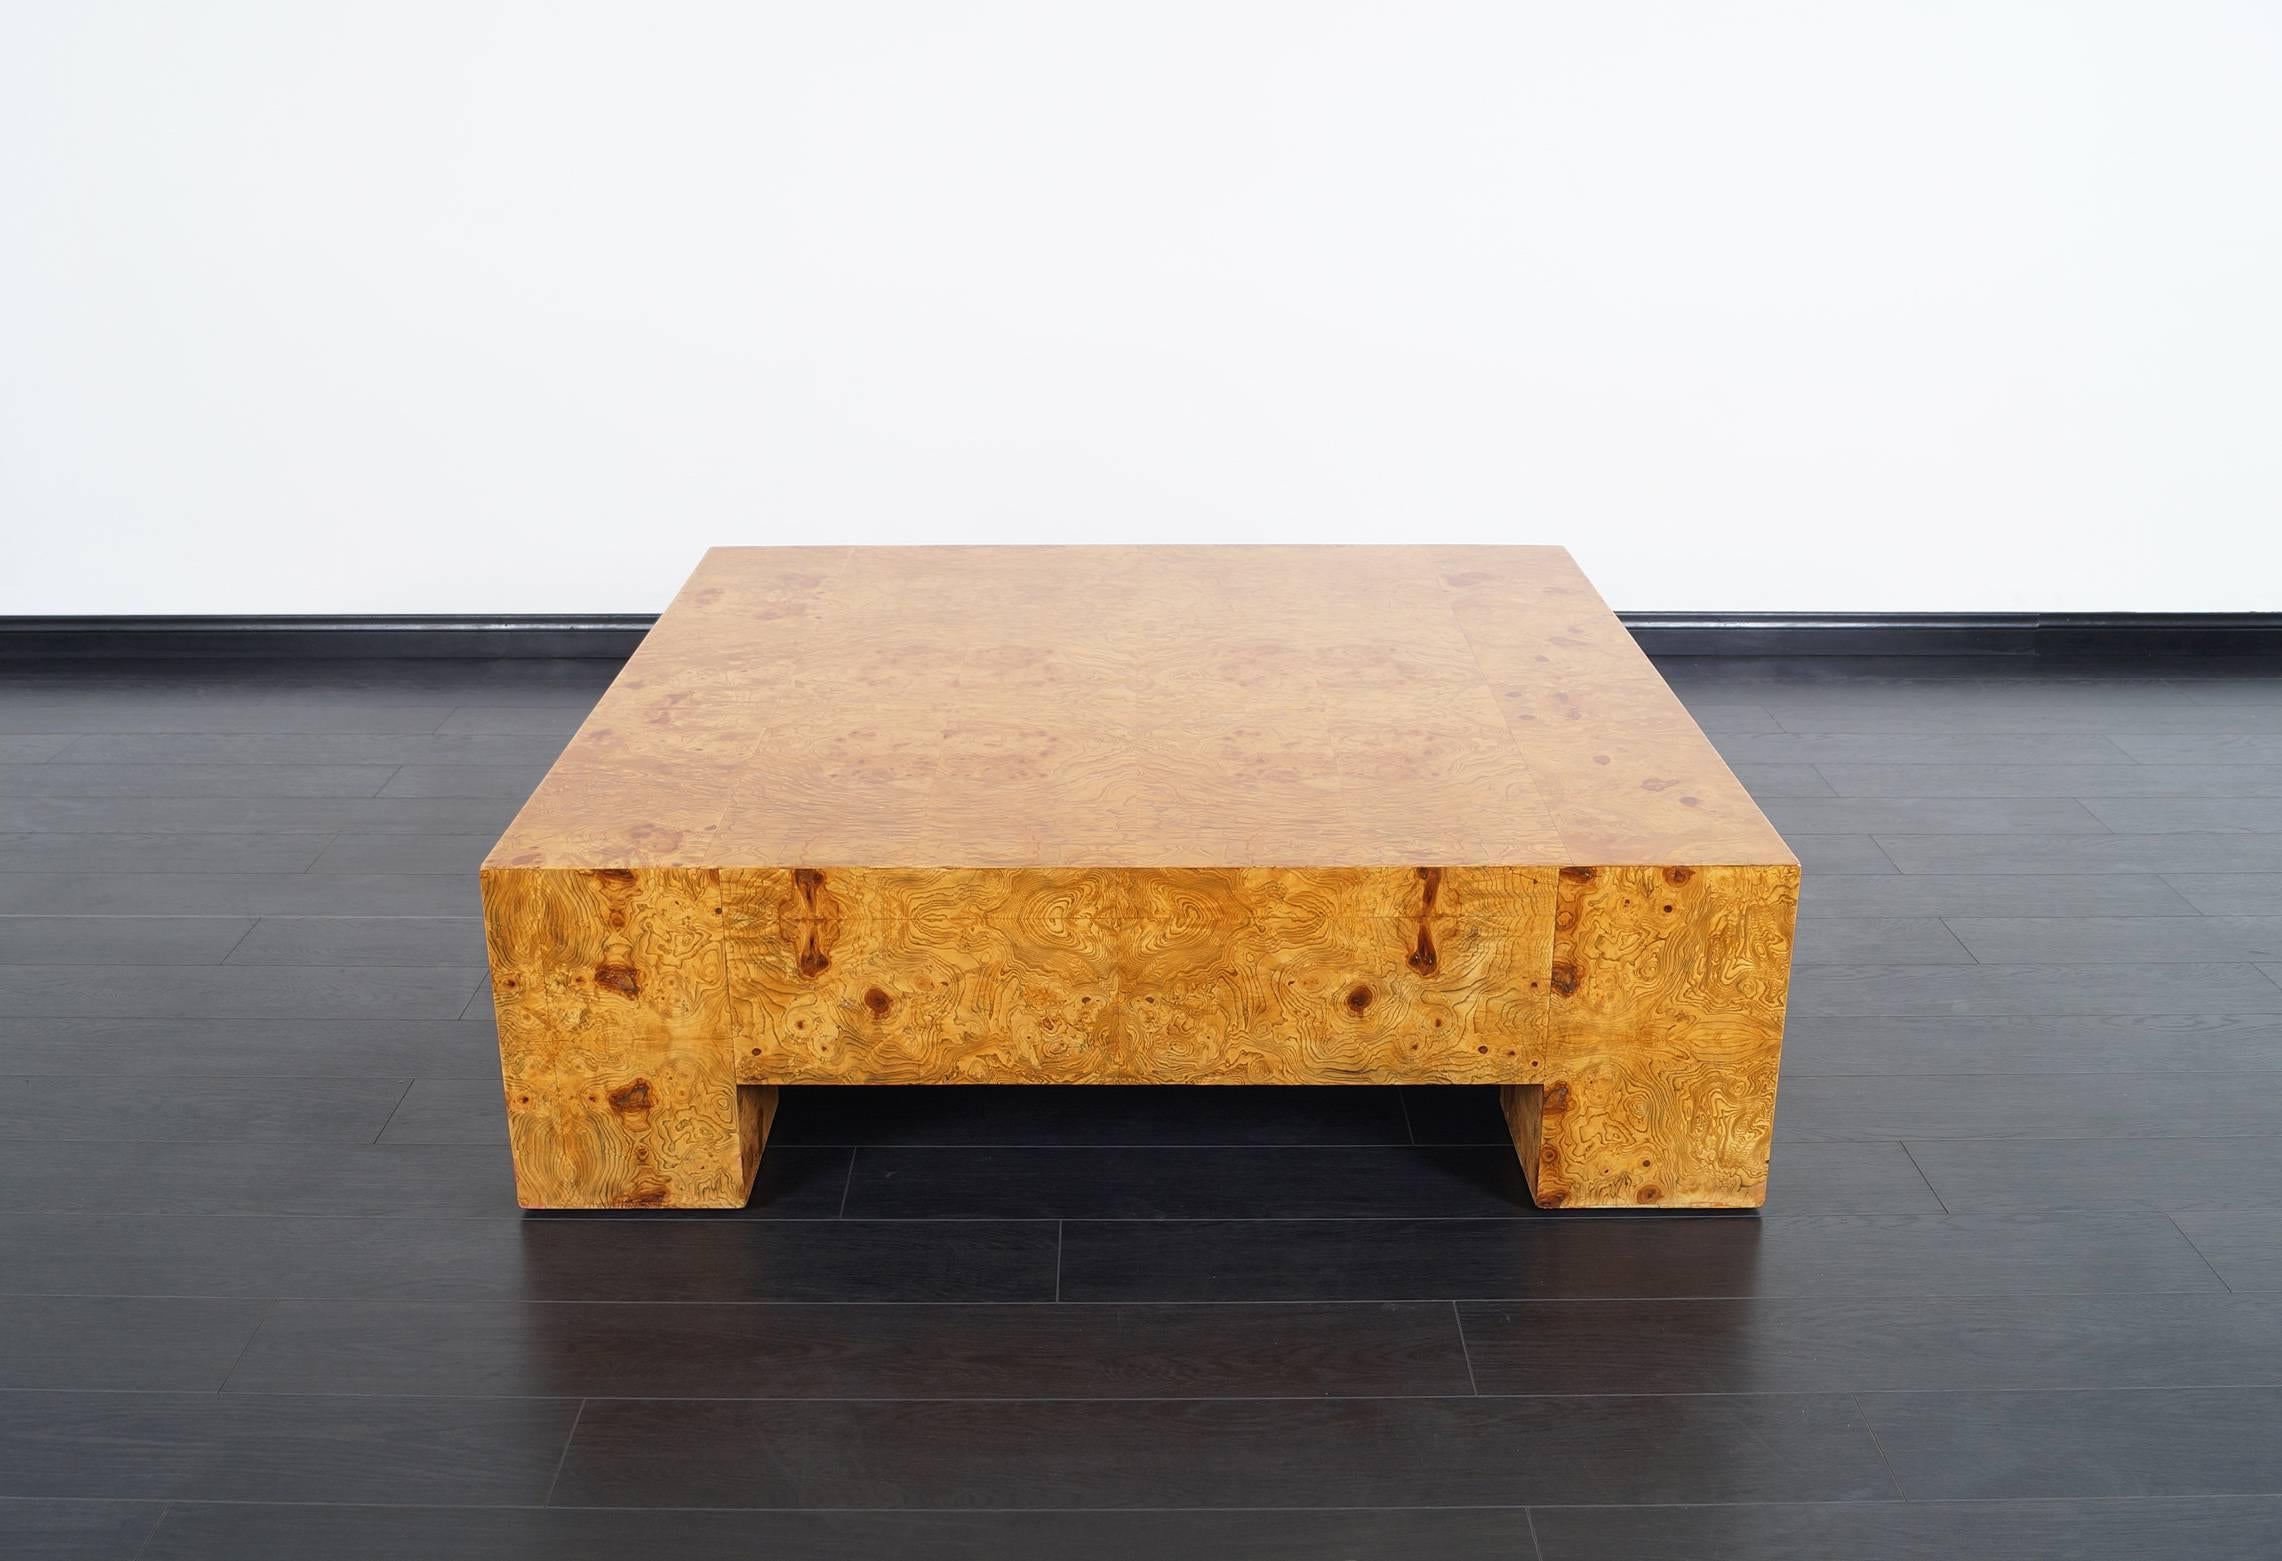 Vintage oversized burl wood coffee table designed by Milo Baughman for Thayer Coggin. This coffee table is simply amazing.